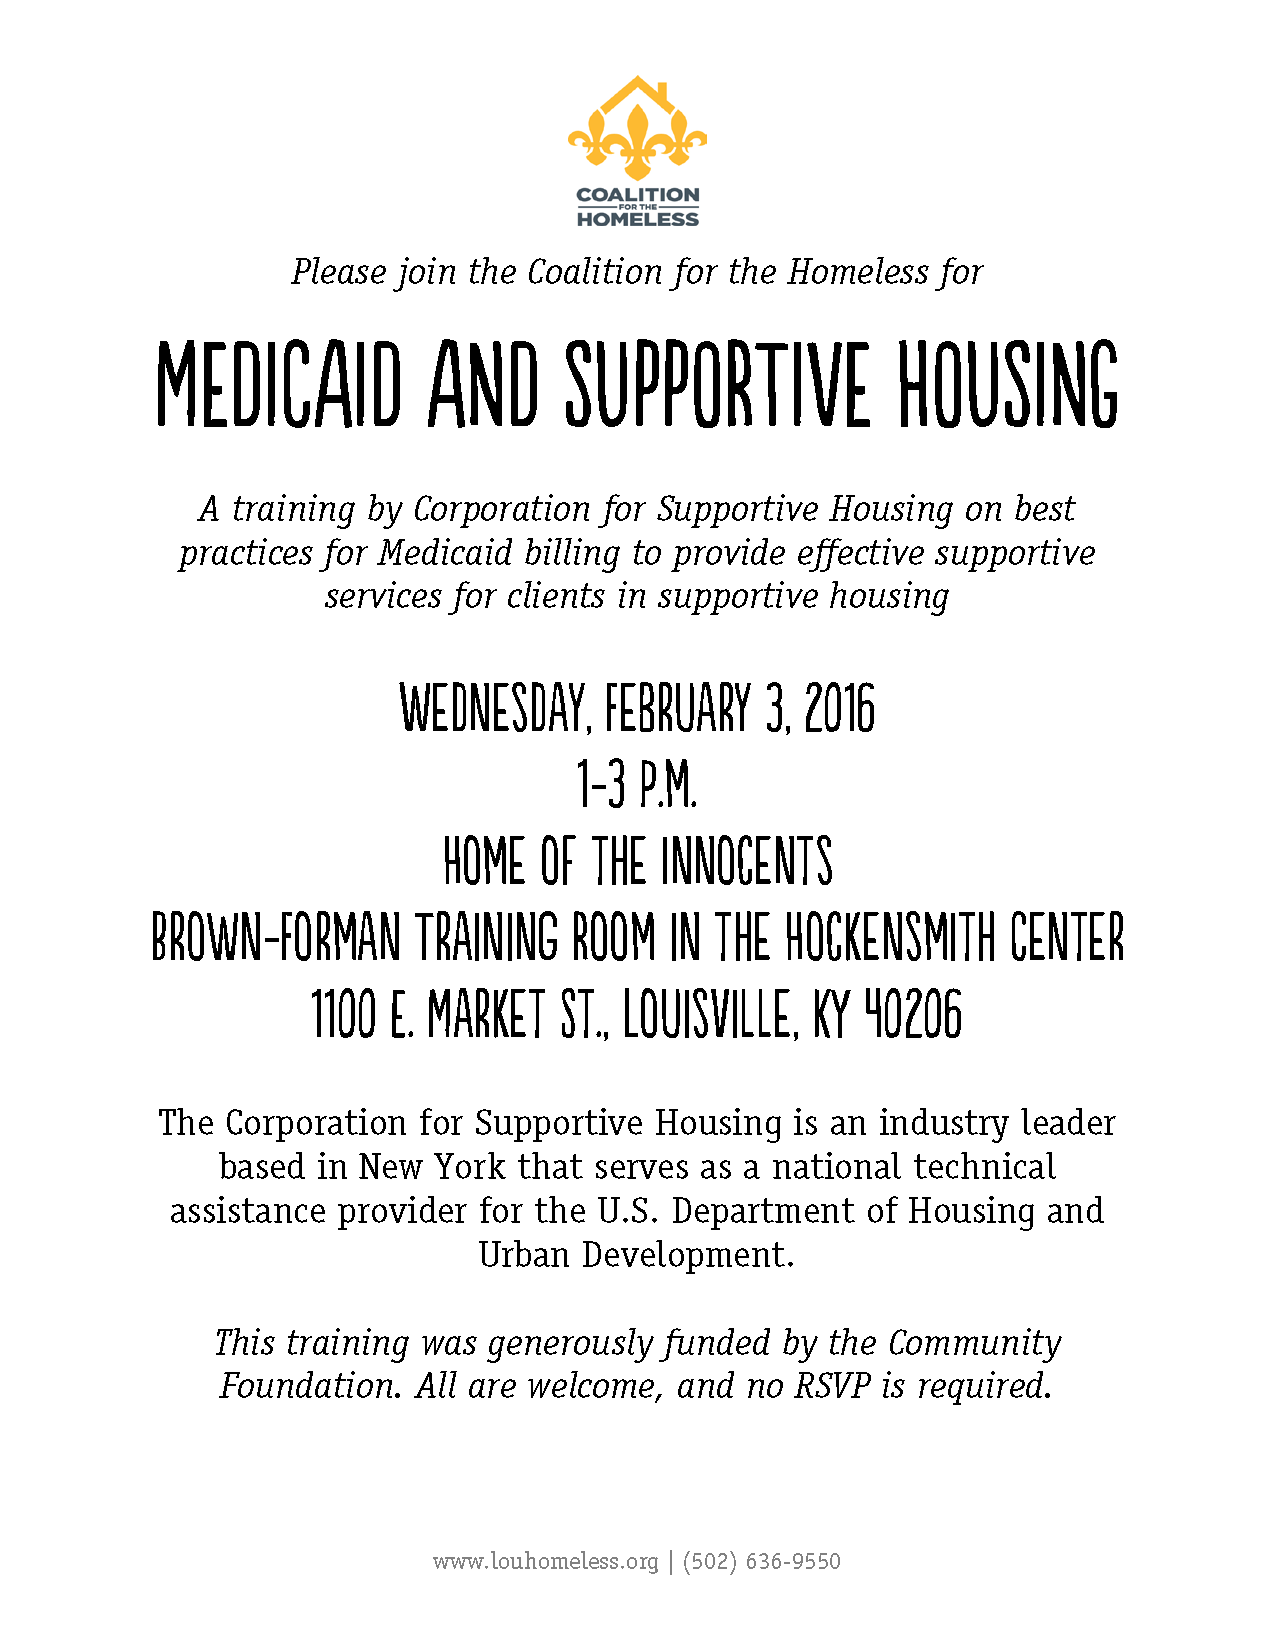 Medicaid and Supportive Housing - reschedule